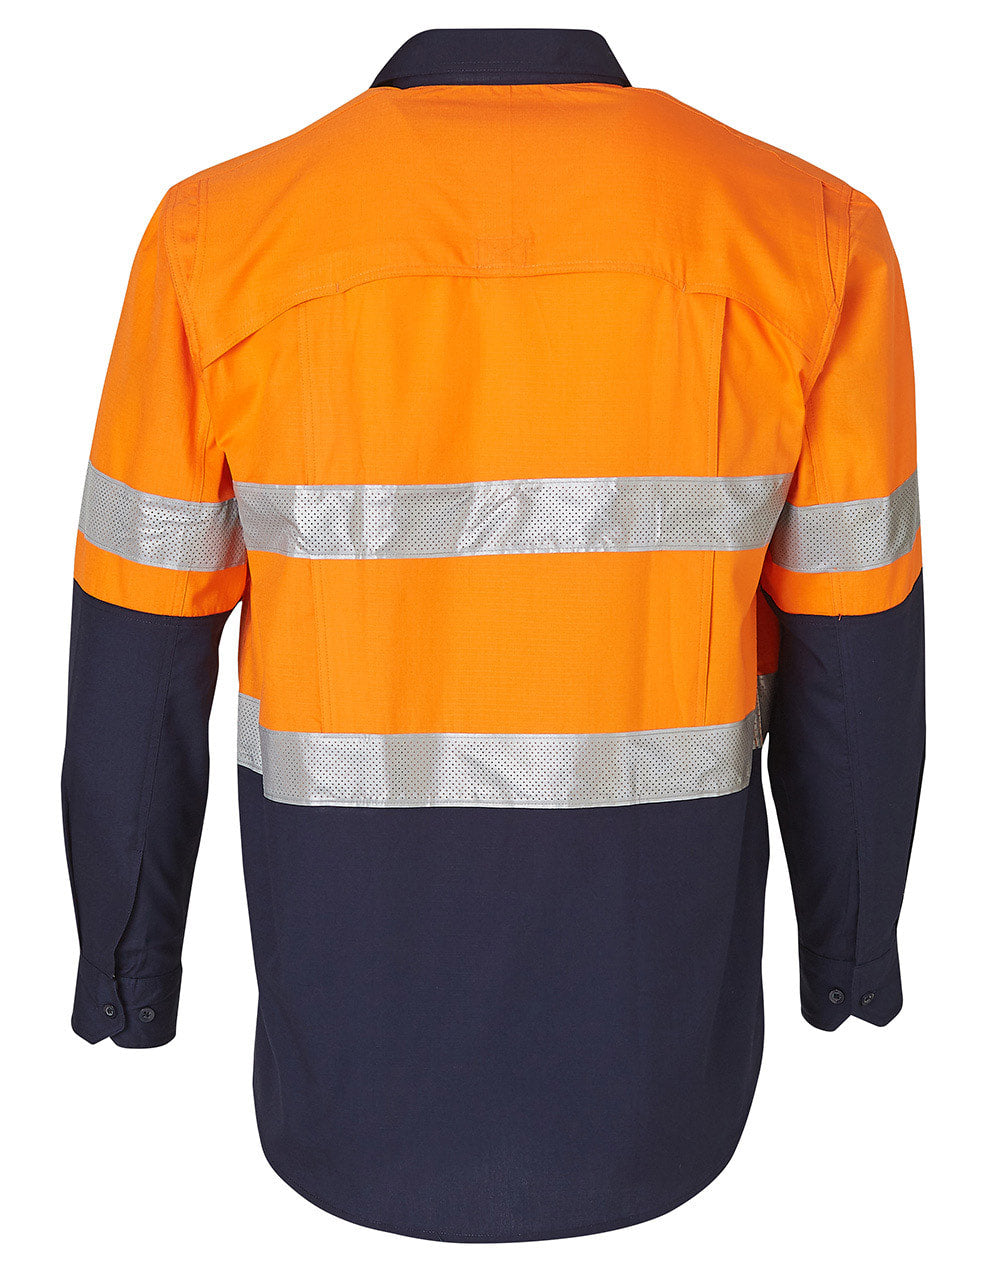 AIW SW69 LONG SLEEVE SAFETY SHIRT